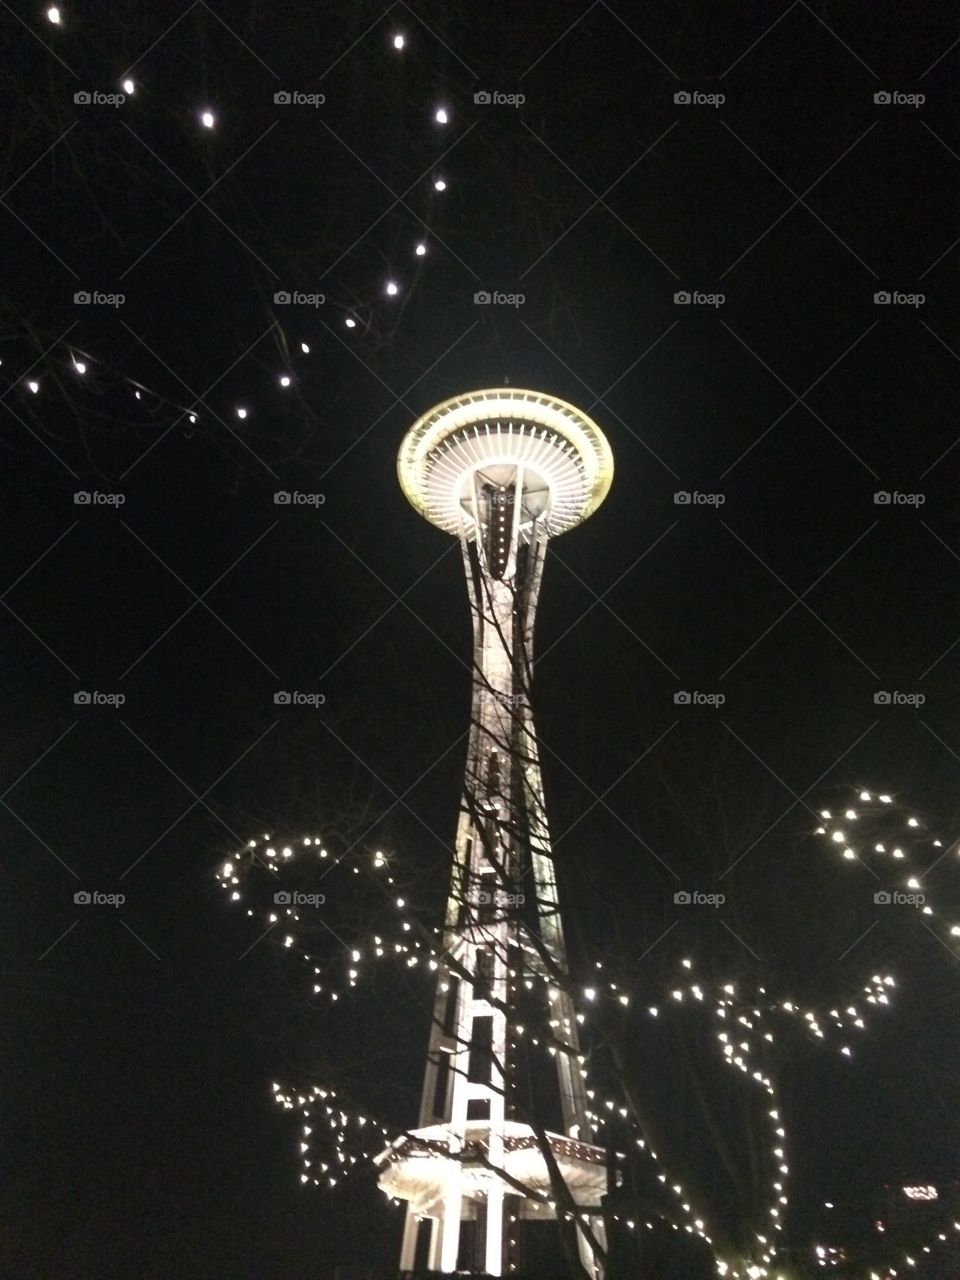 A space needle seen with Christmas lights in the foreground.